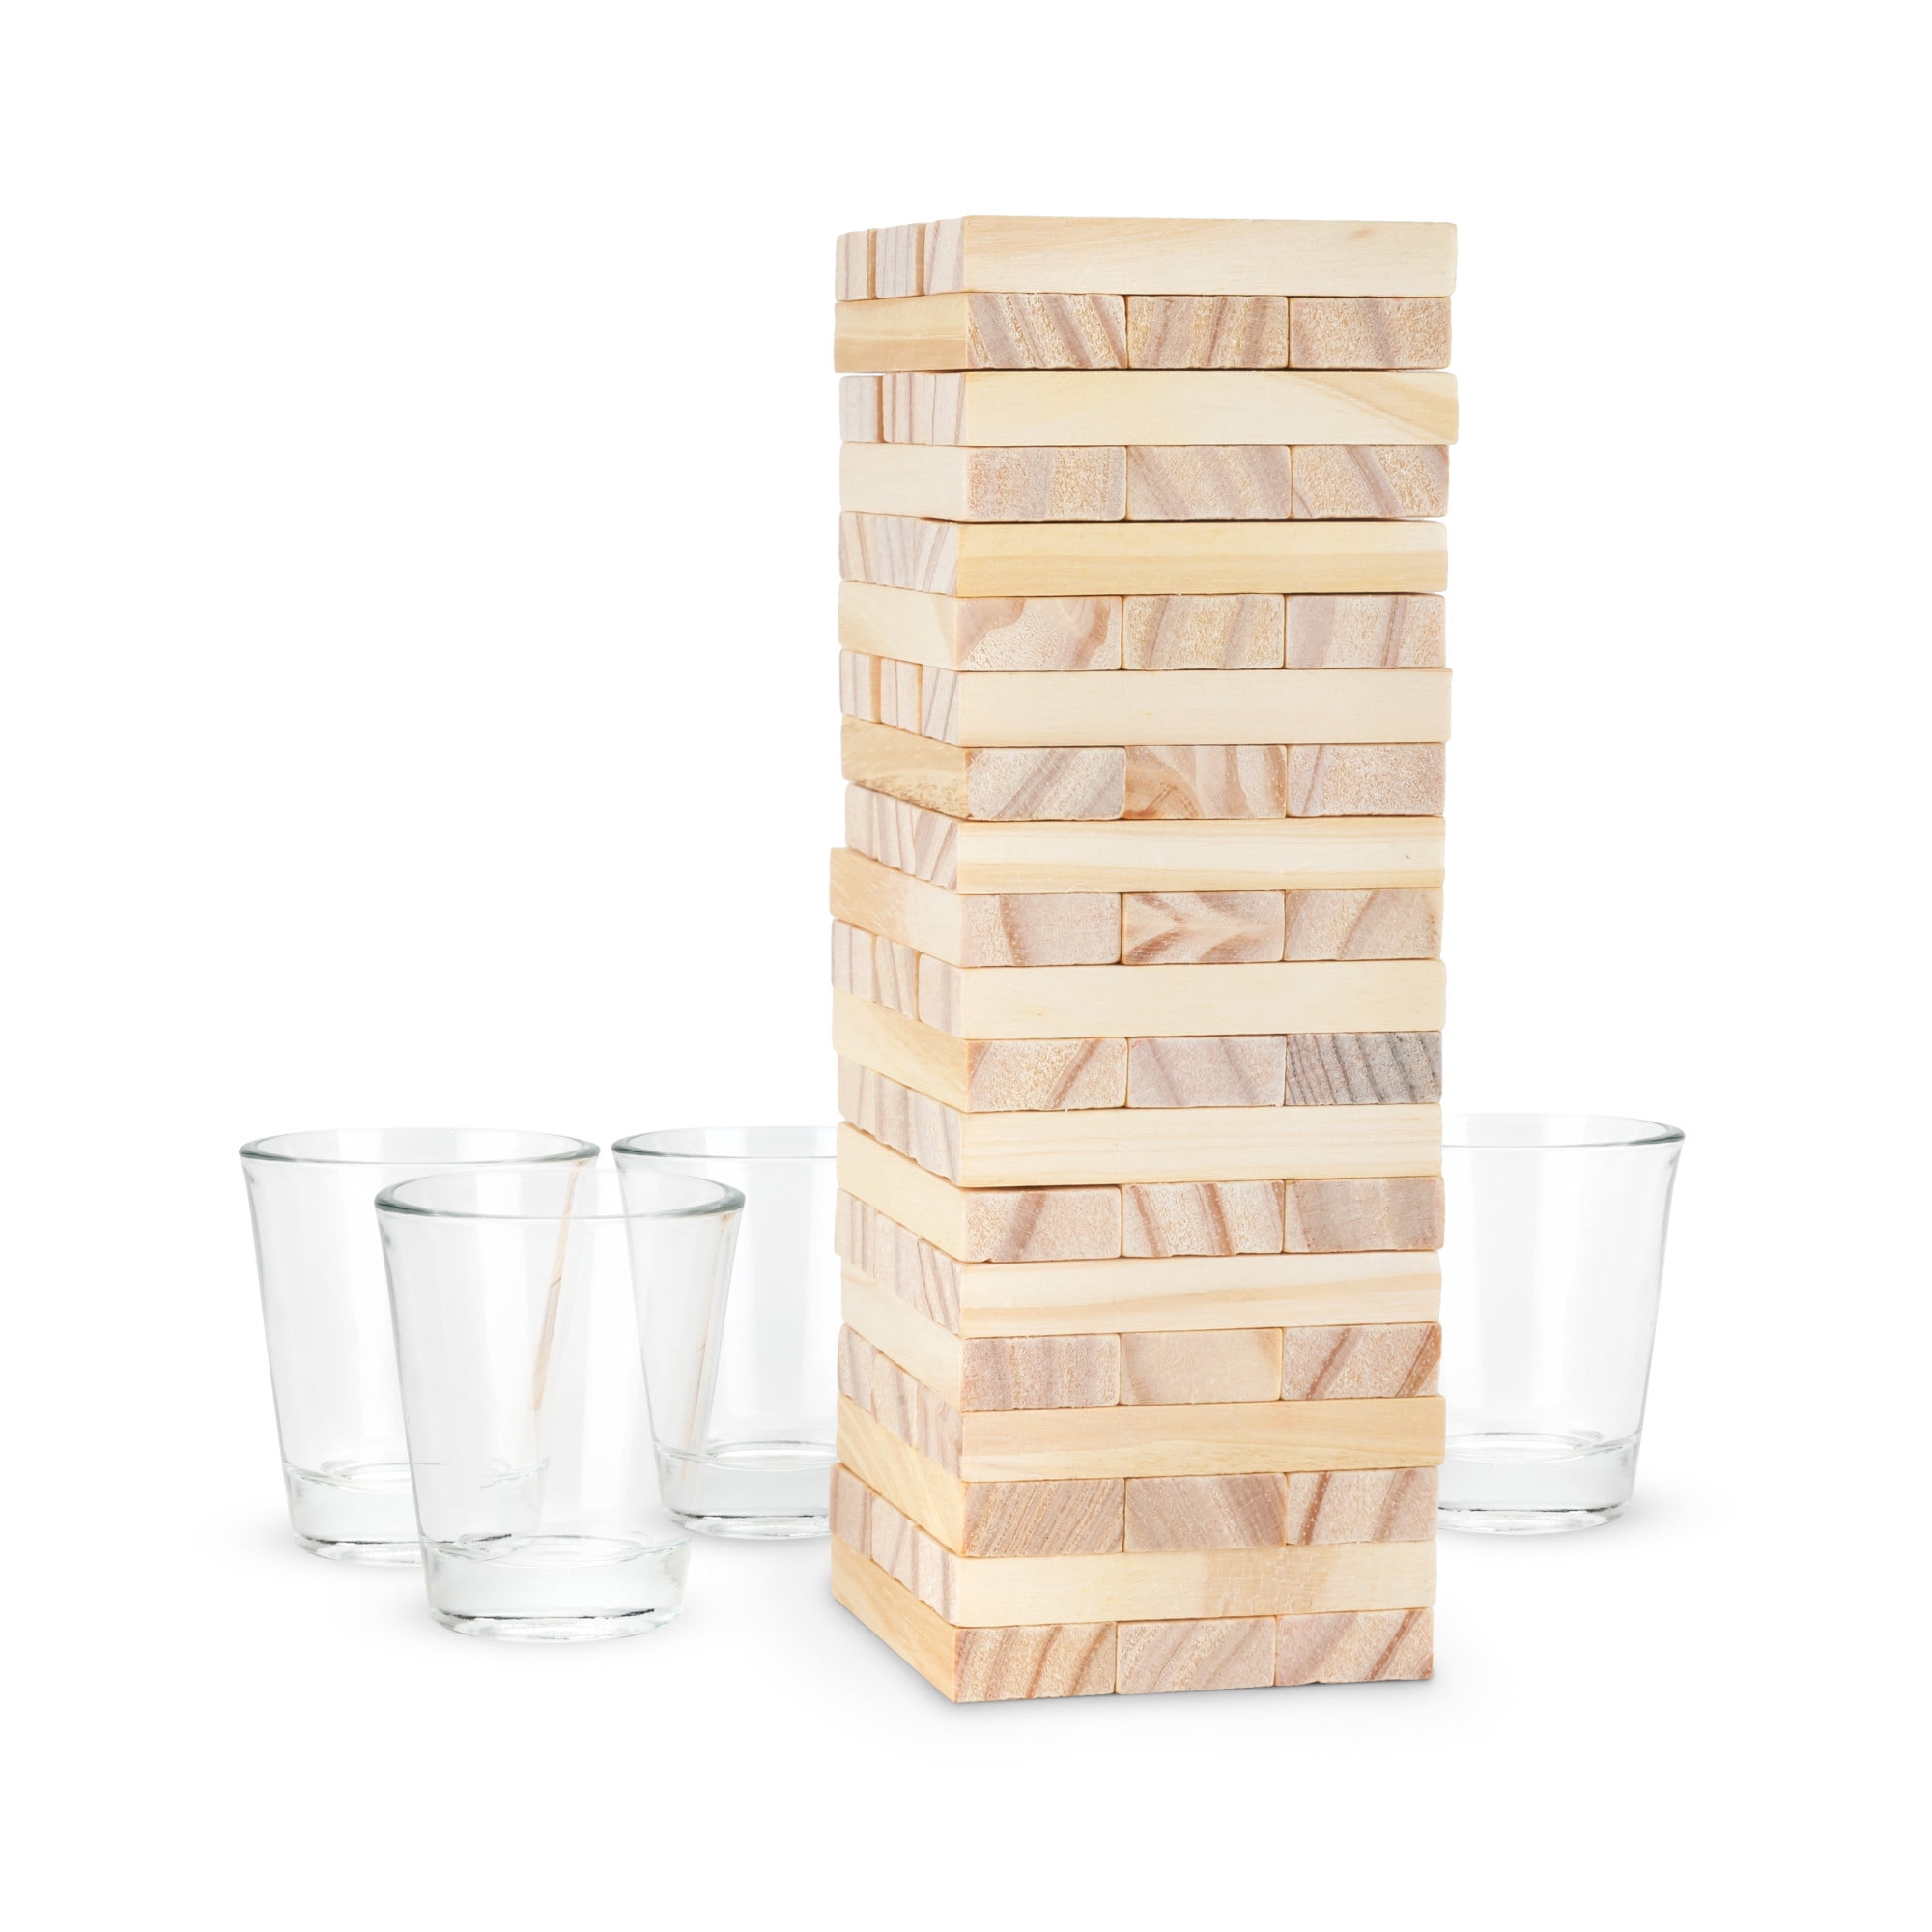 Drunken Tower Drink Game! Fun Drinking Game with friends and family for a  Game Night with this Drunken Tower Drinking Game;Product Size: 8 x 7.5 x4 